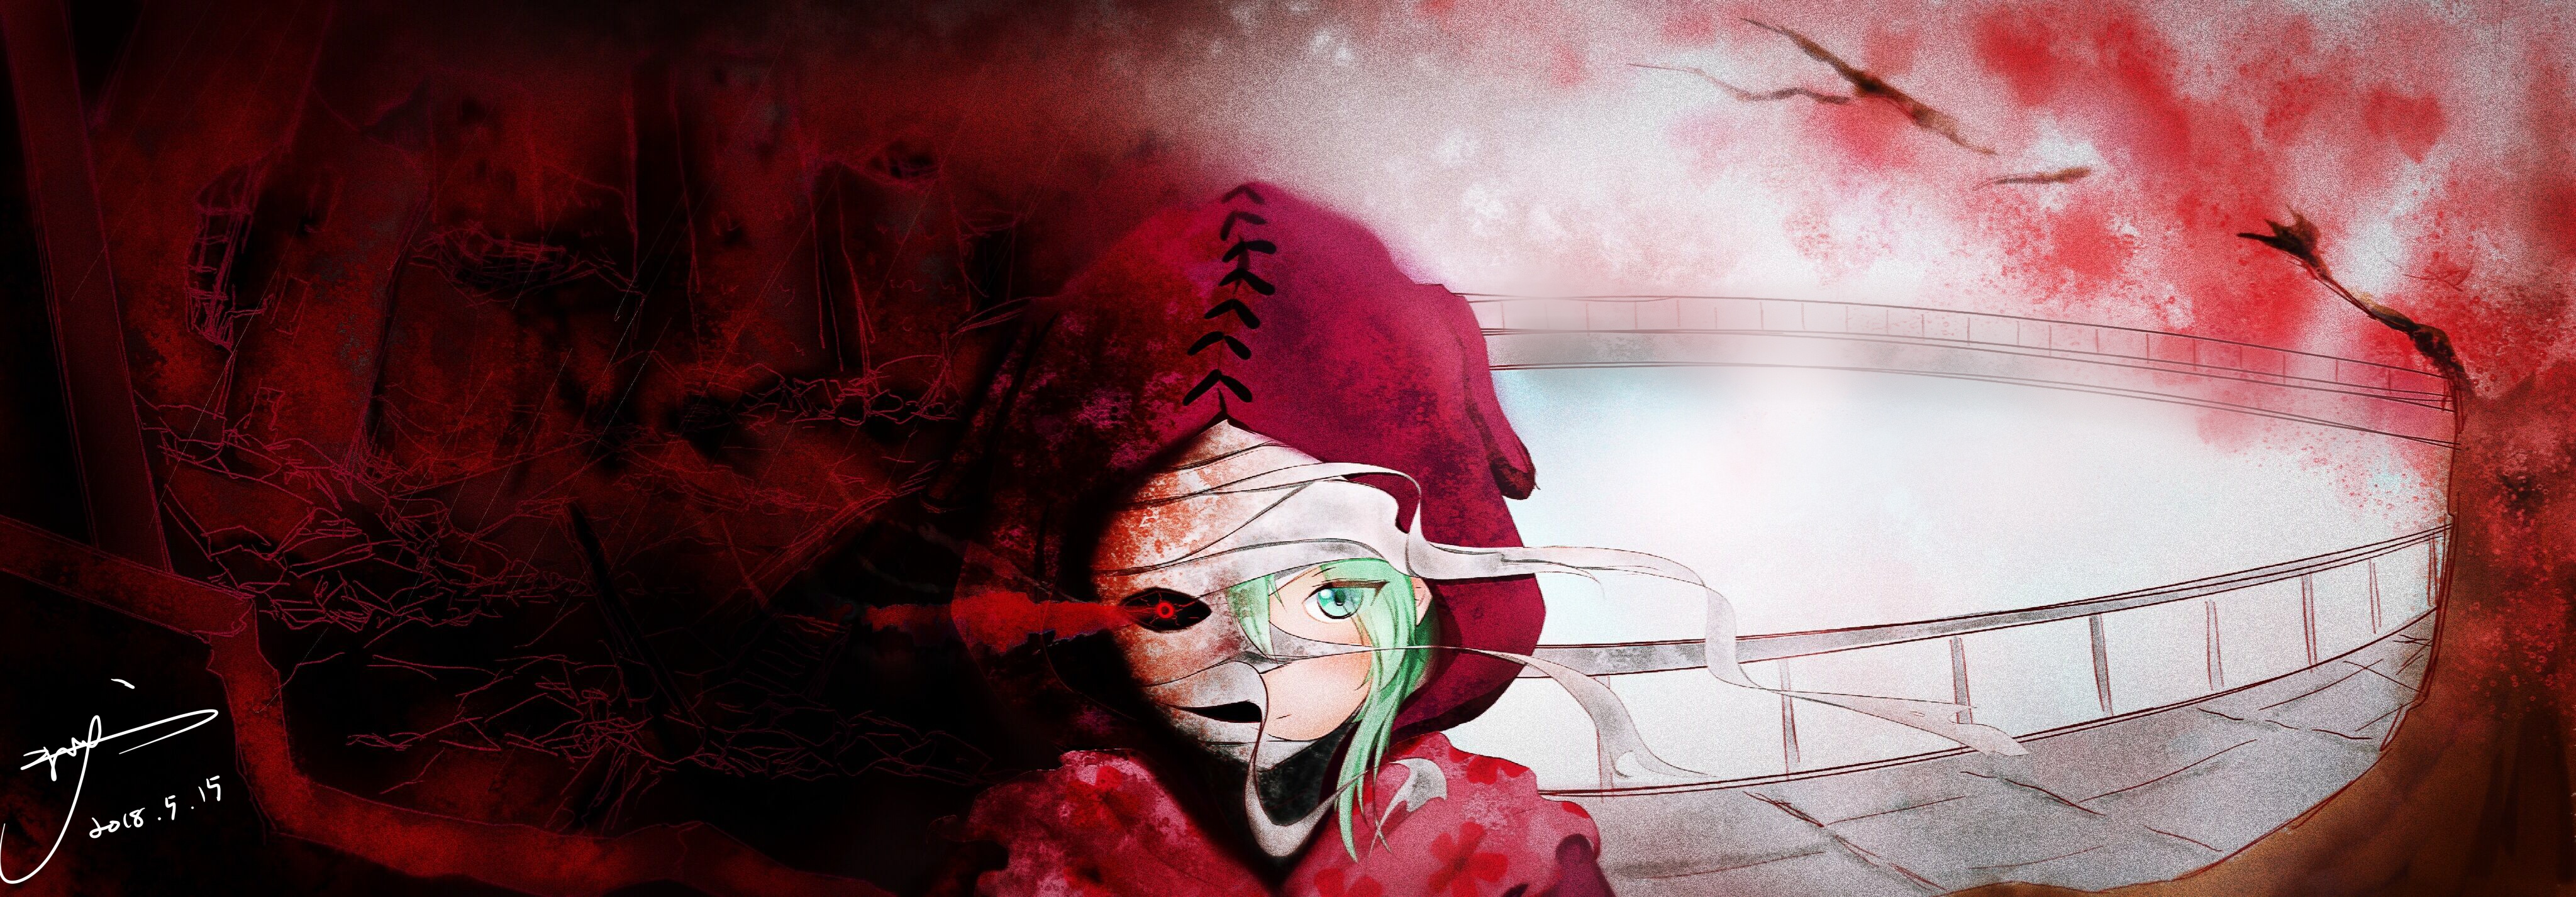 Tokyo Ghoul Re HD Wallpaper Background Image Id